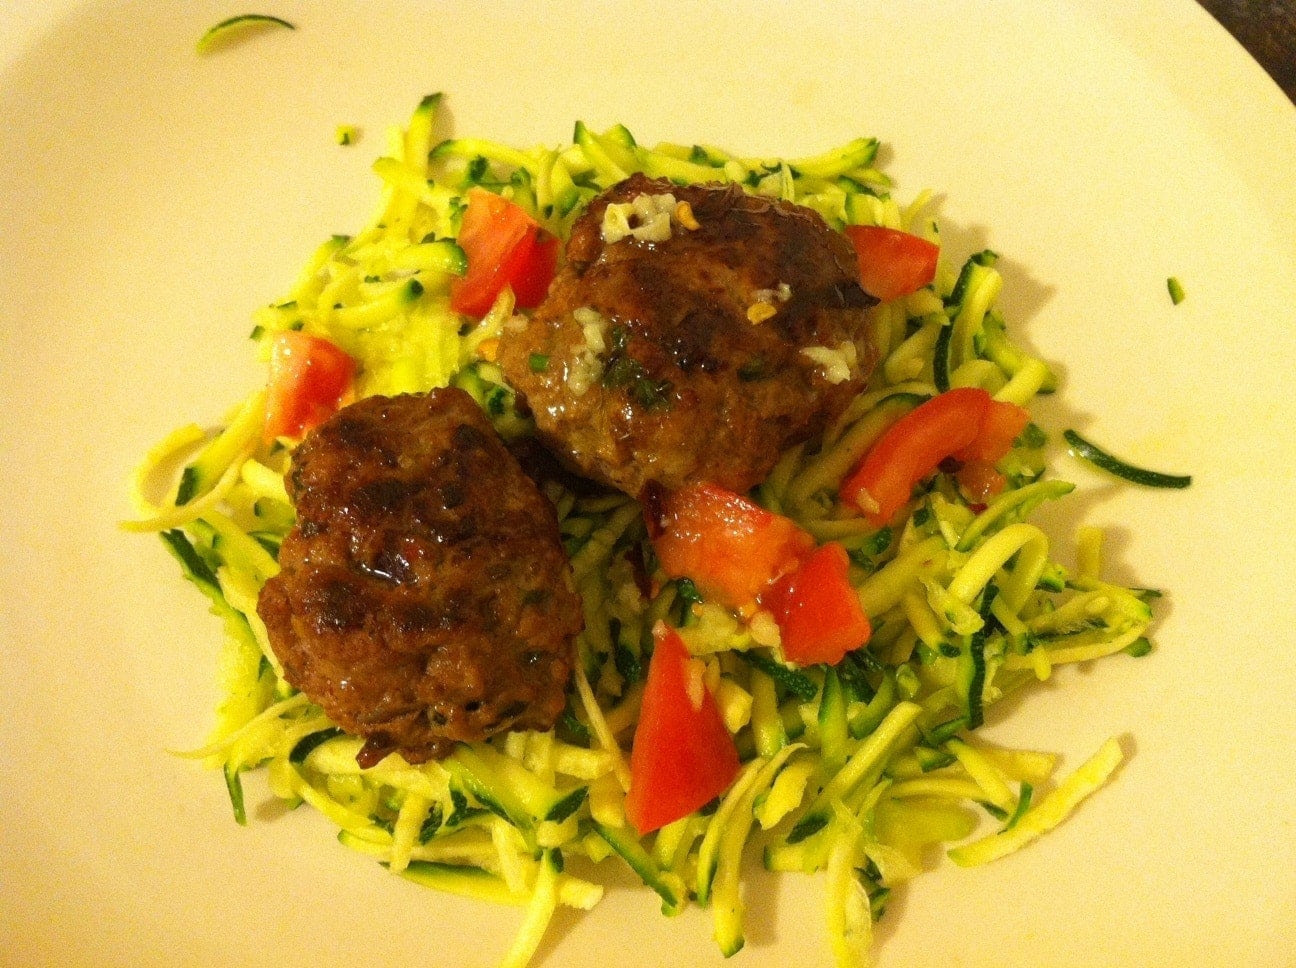 plate of healthy food with mini burgers and zucchini salad